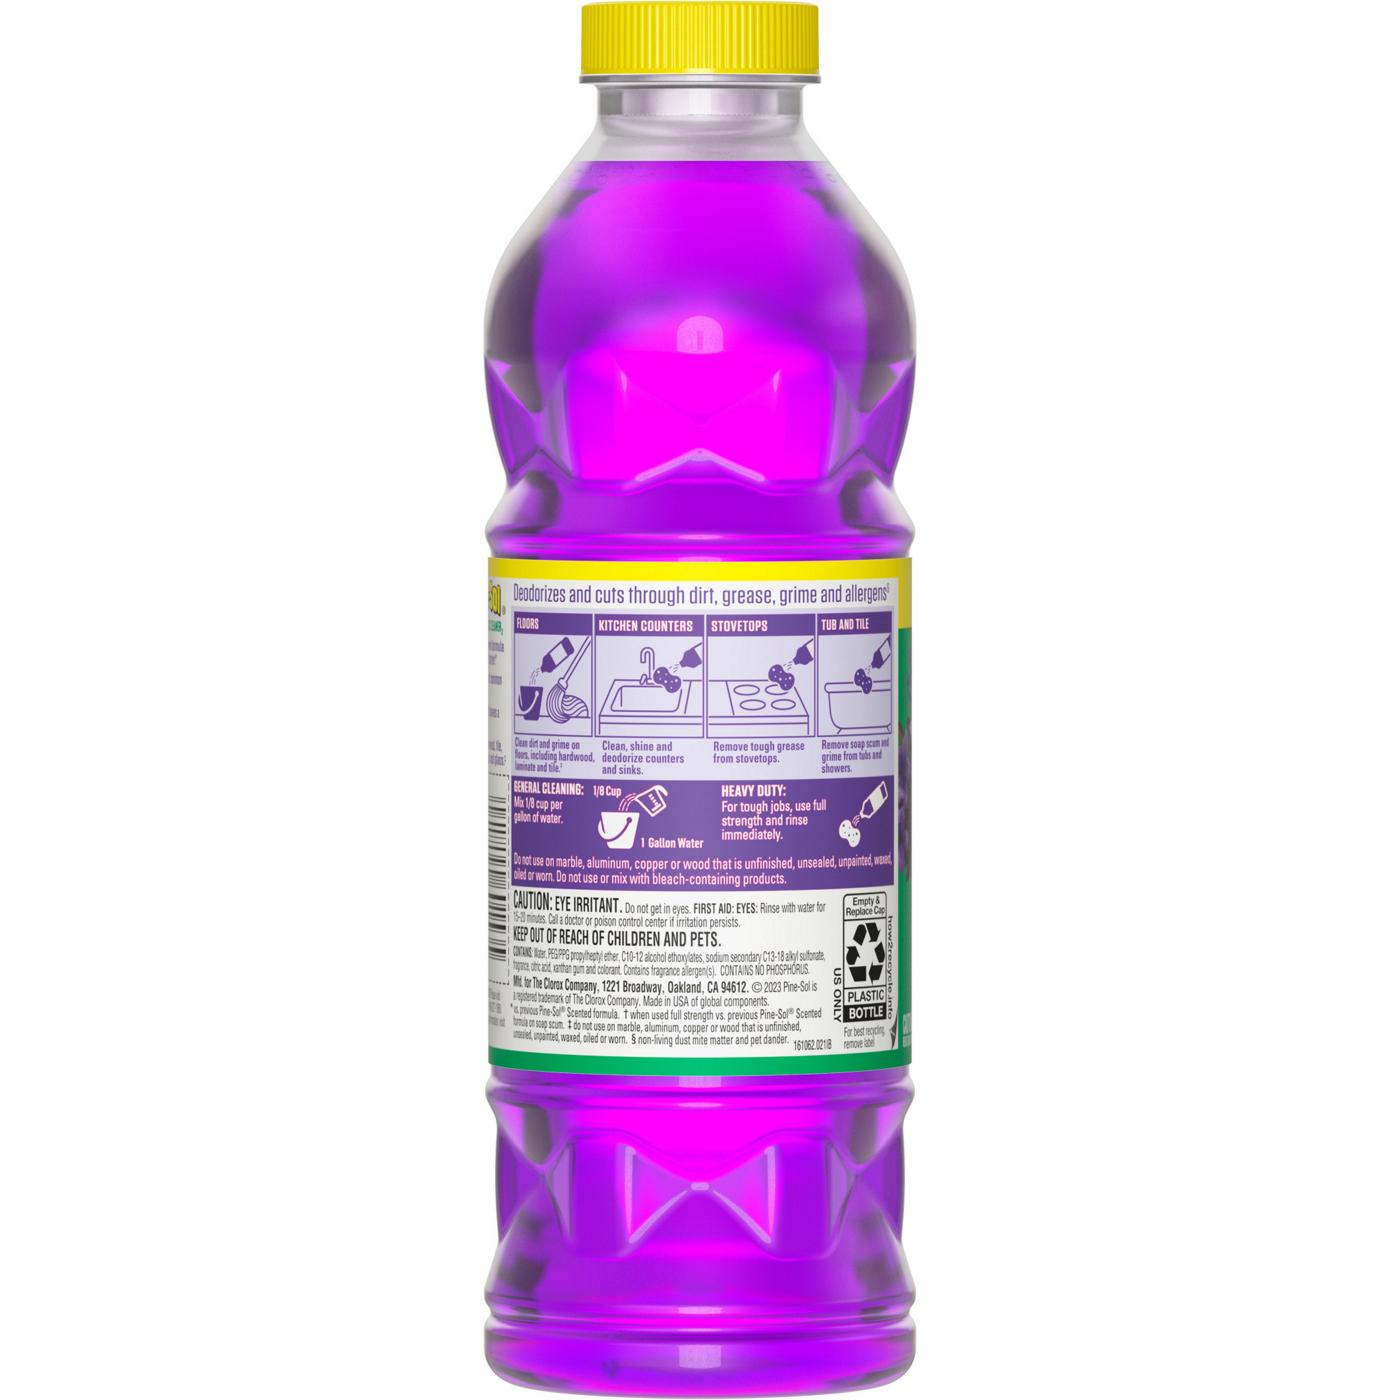 Pine-Sol Lavender Clean Multi-Surface Cleaner; image 2 of 9